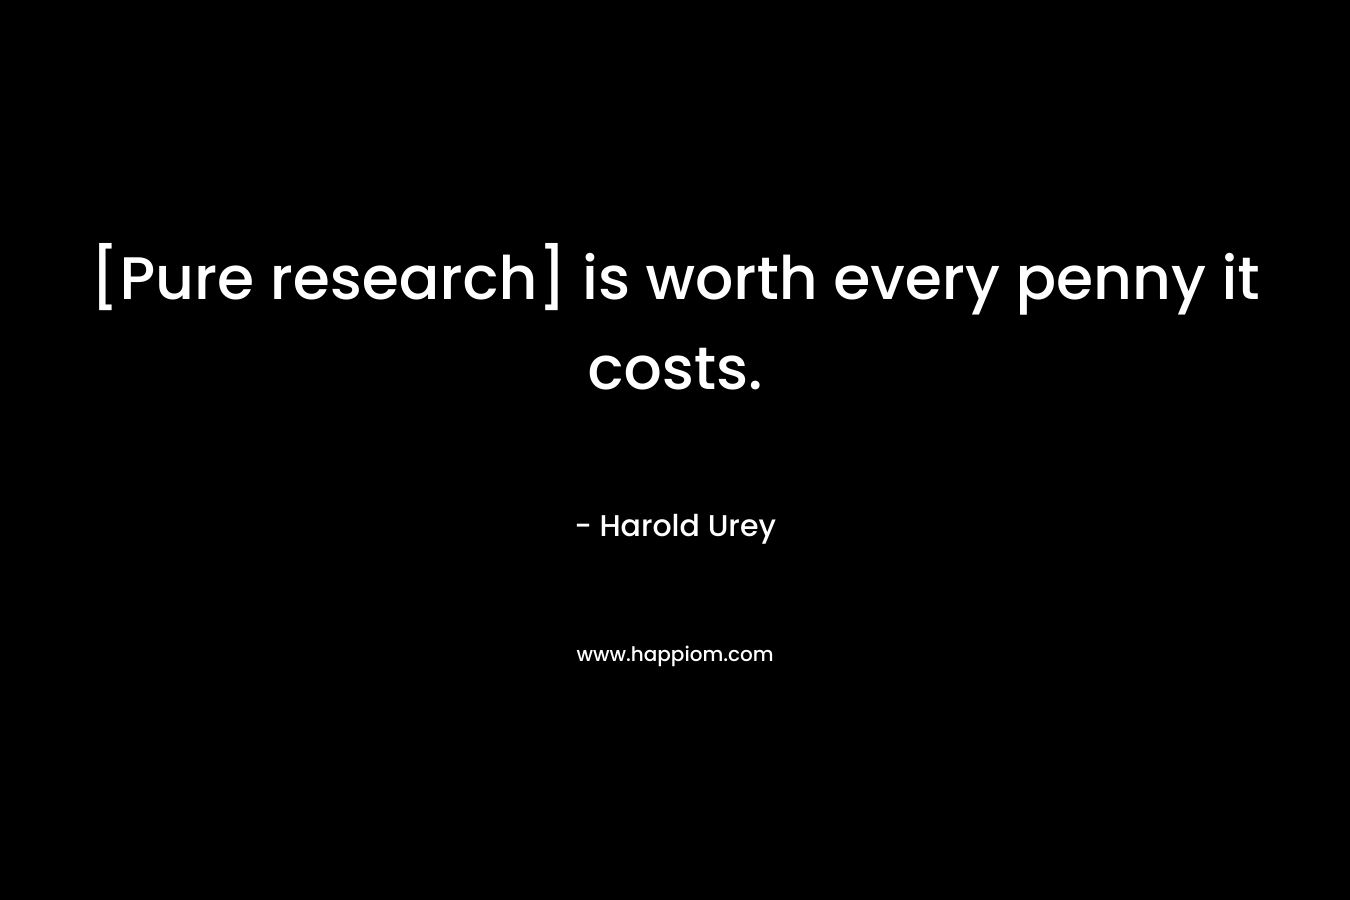 [Pure research] is worth every penny it costs. – Harold Urey